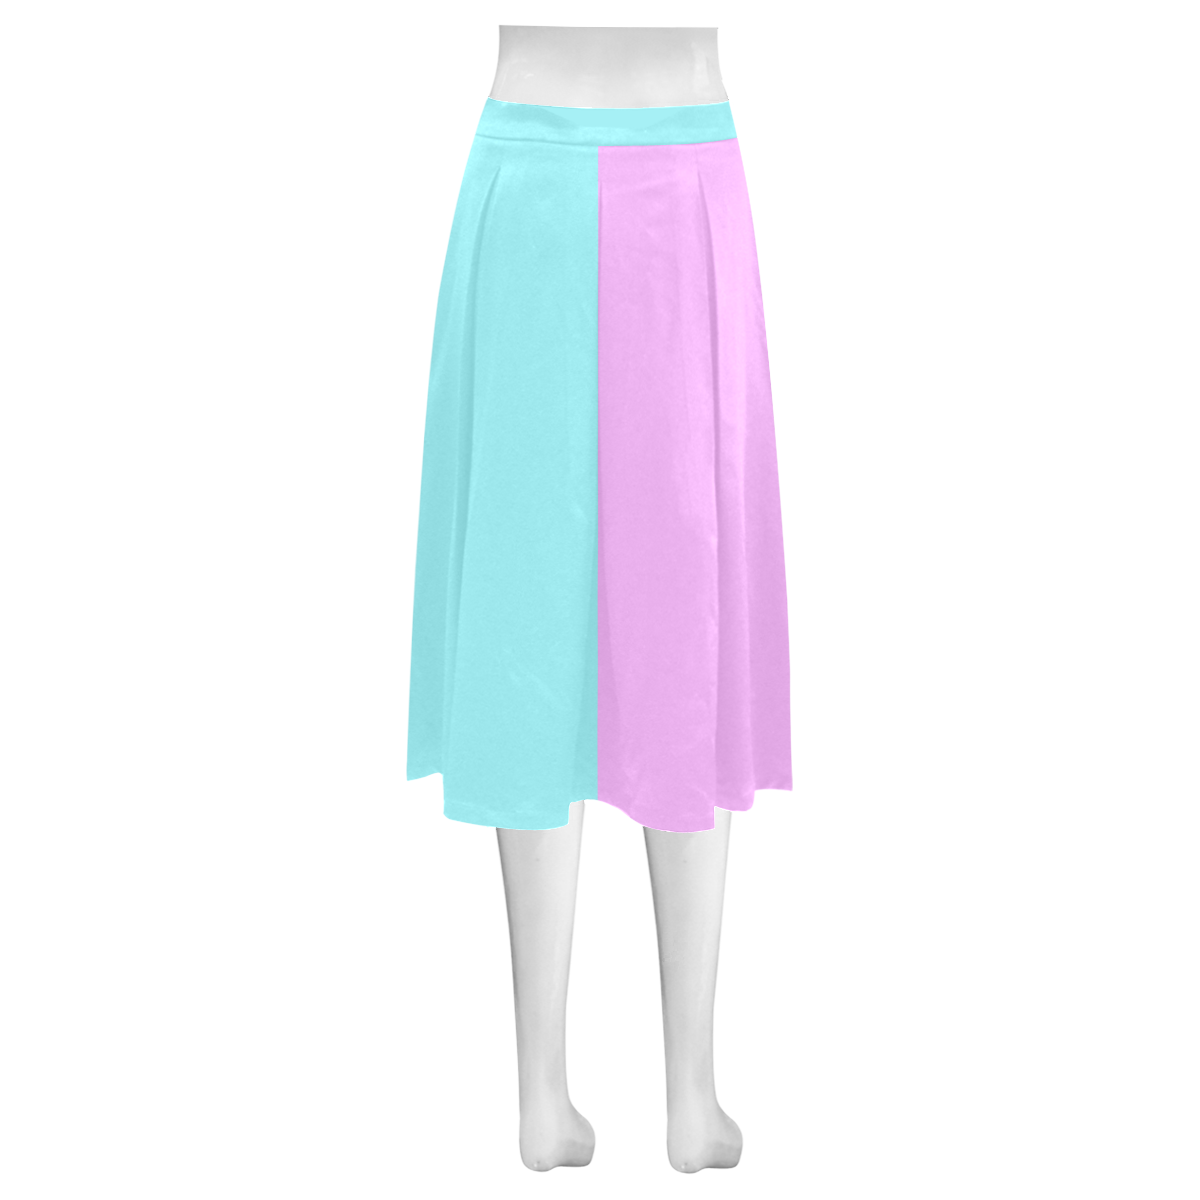 Only two Colors: Turquoise - Light Pink Mnemosyne Women's Crepe Skirt (Model D16)